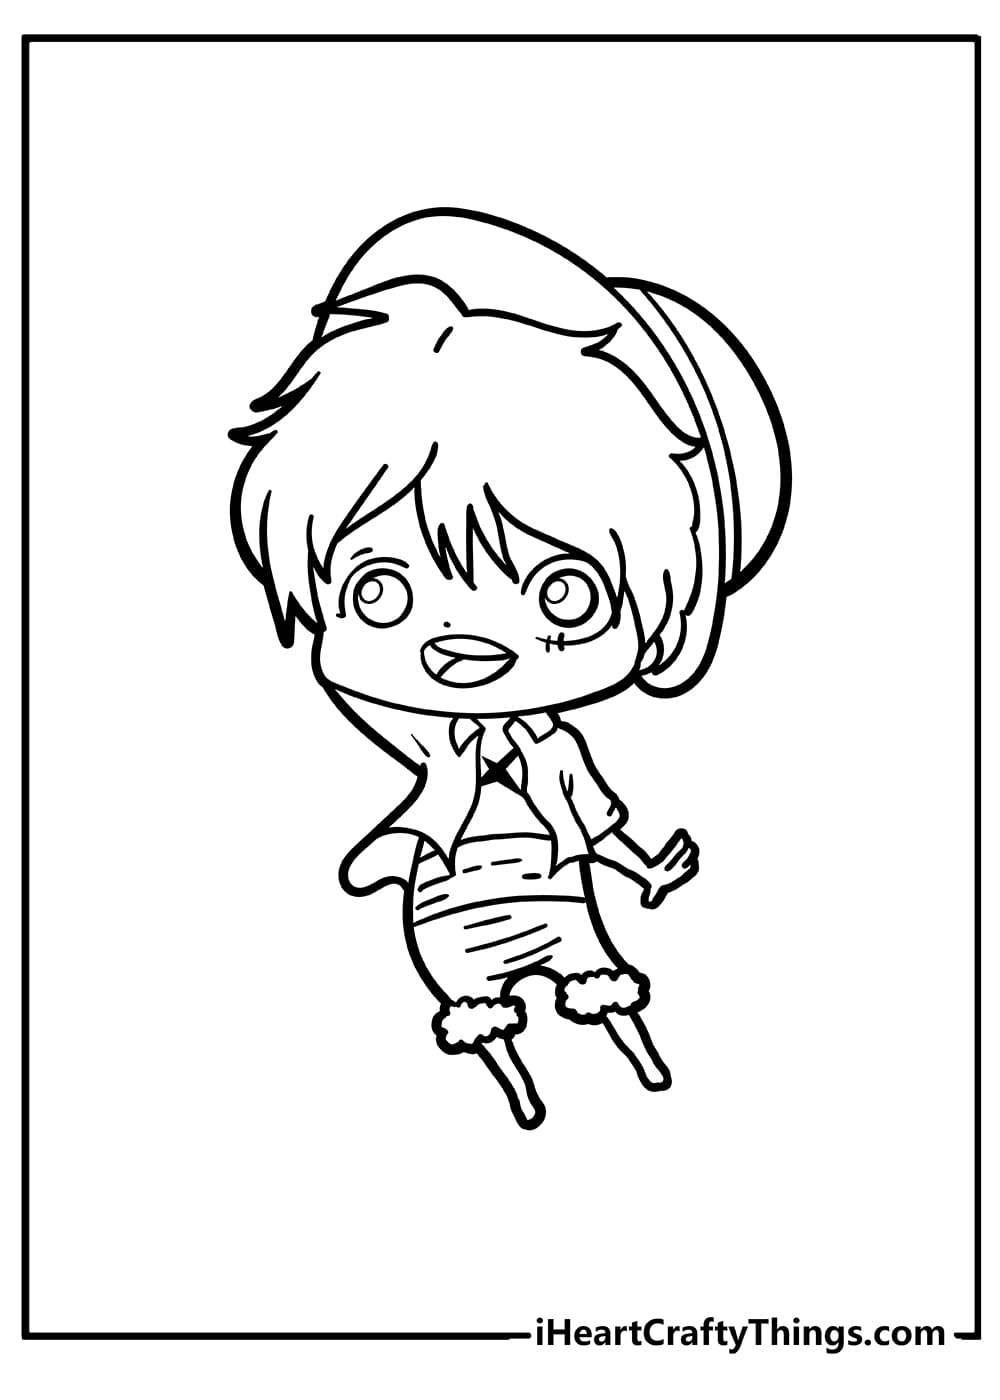 Chibi Cleo and Cuquin Coloring Page